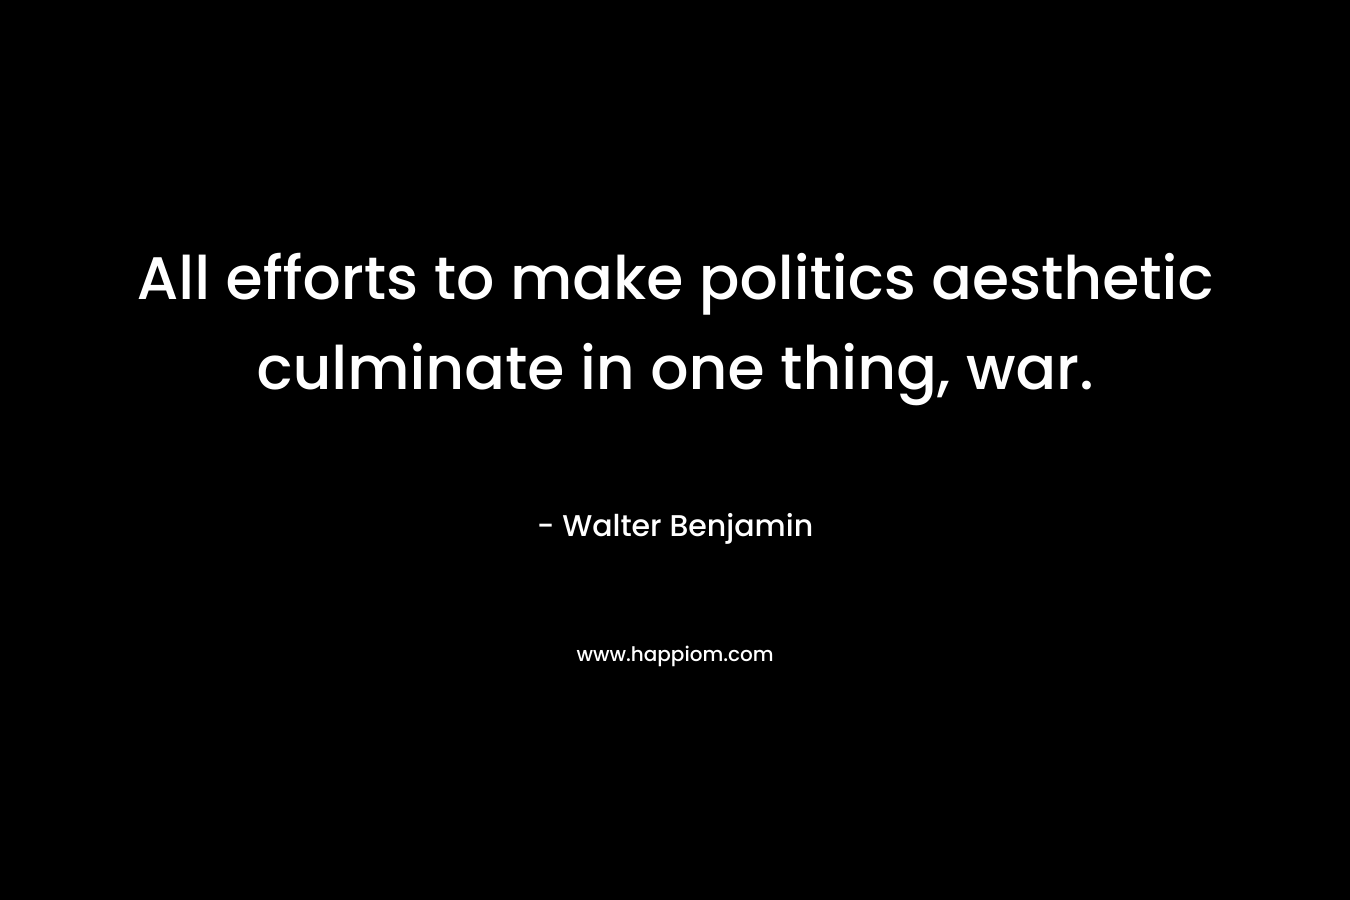 All efforts to make politics aesthetic culminate in one thing, war. – Walter Benjamin